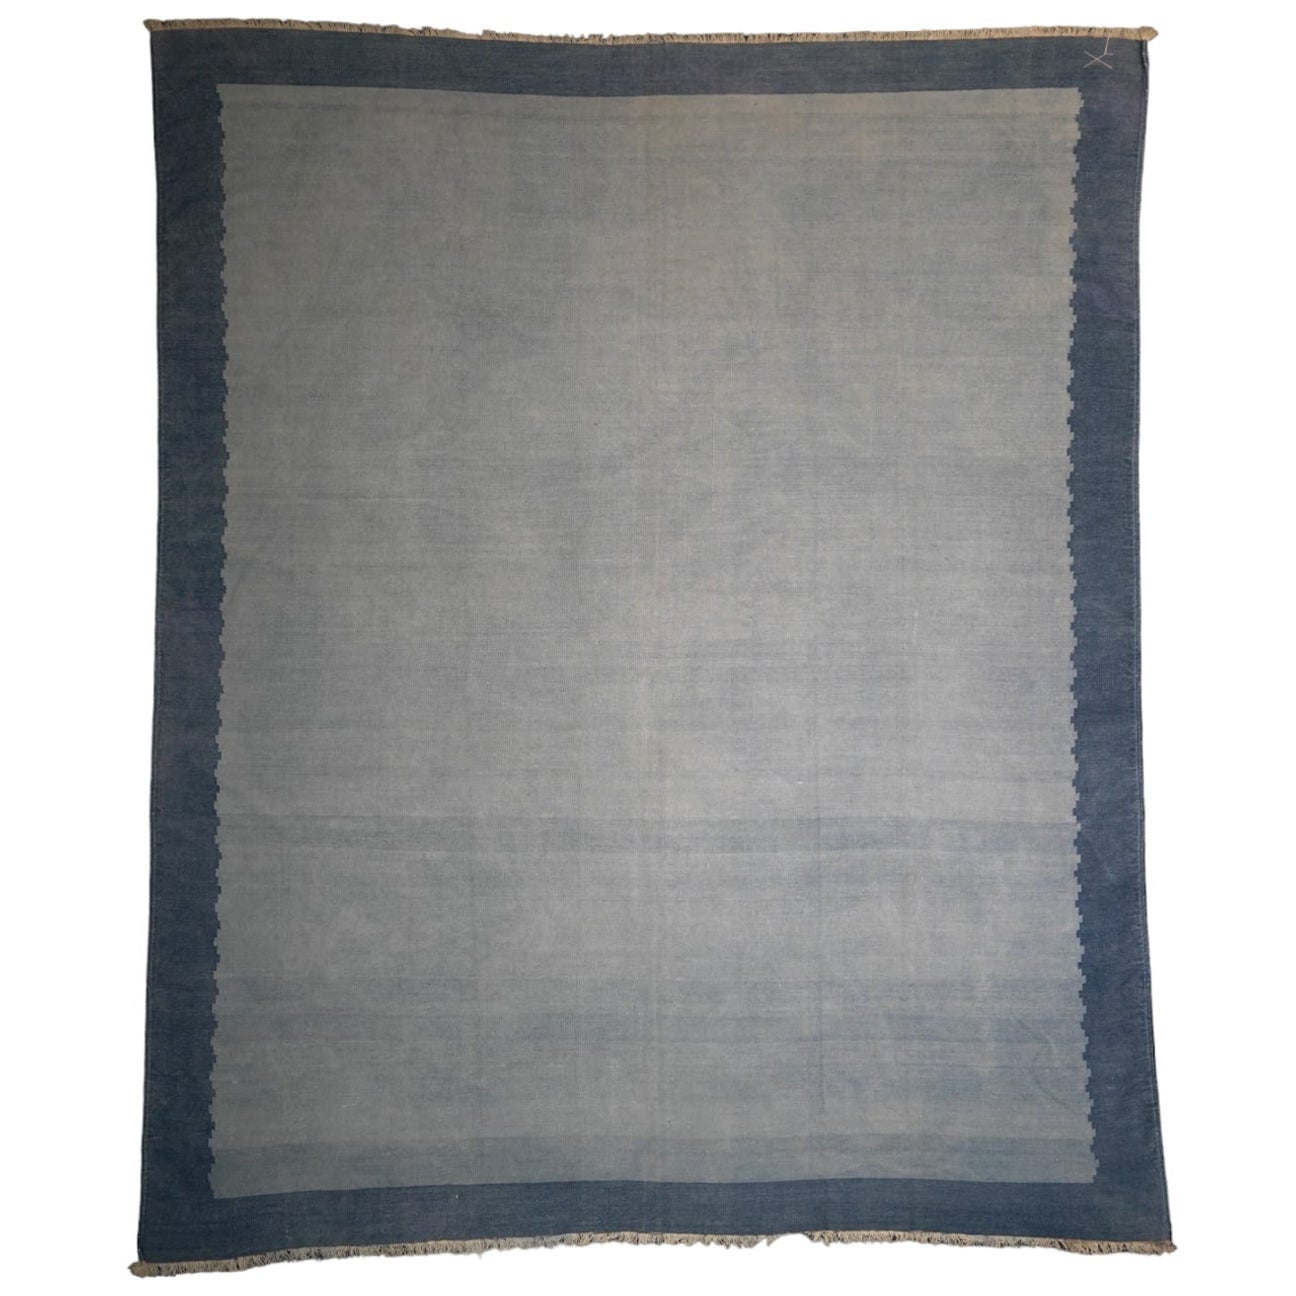 Vintage Dhurrie Rug in Blue, with Solid Border from Rug & Kilim